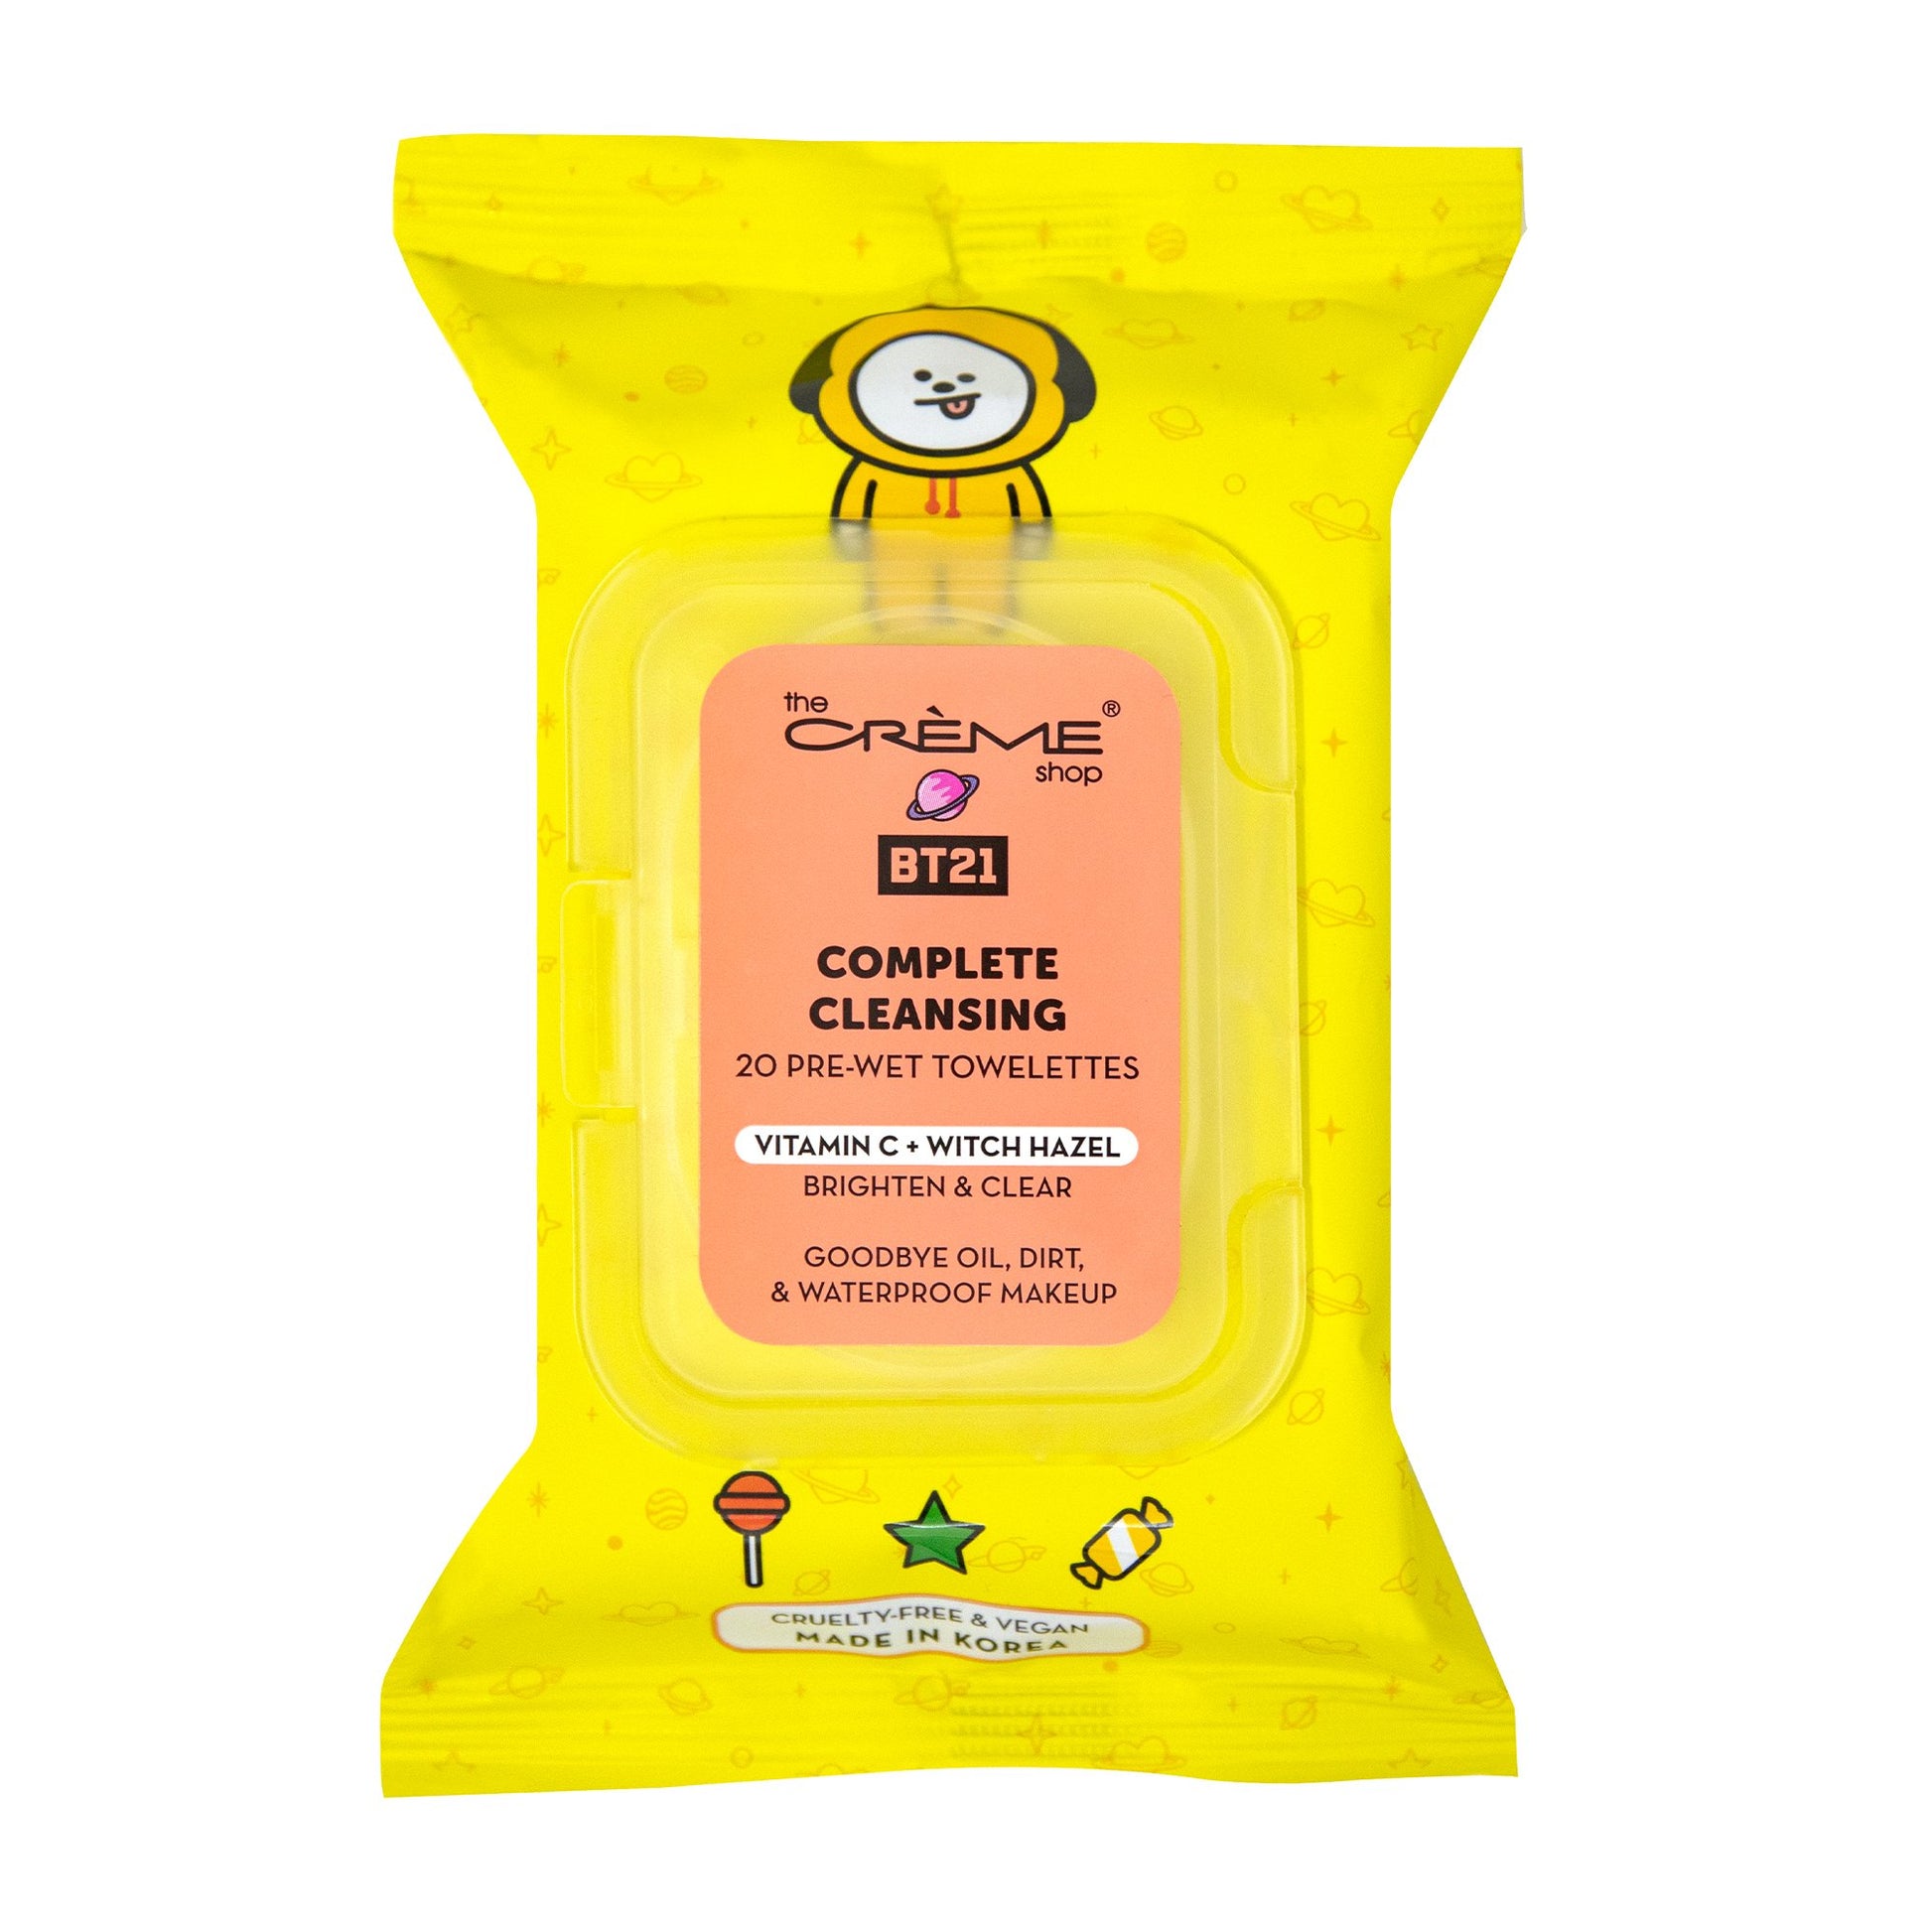 CHIMMY Complete Cleansing Towelettes - Vitamin C & Witch Hazel (20 Pre-Wet Towelettes) Towelettes The Crème Shop x BT21 